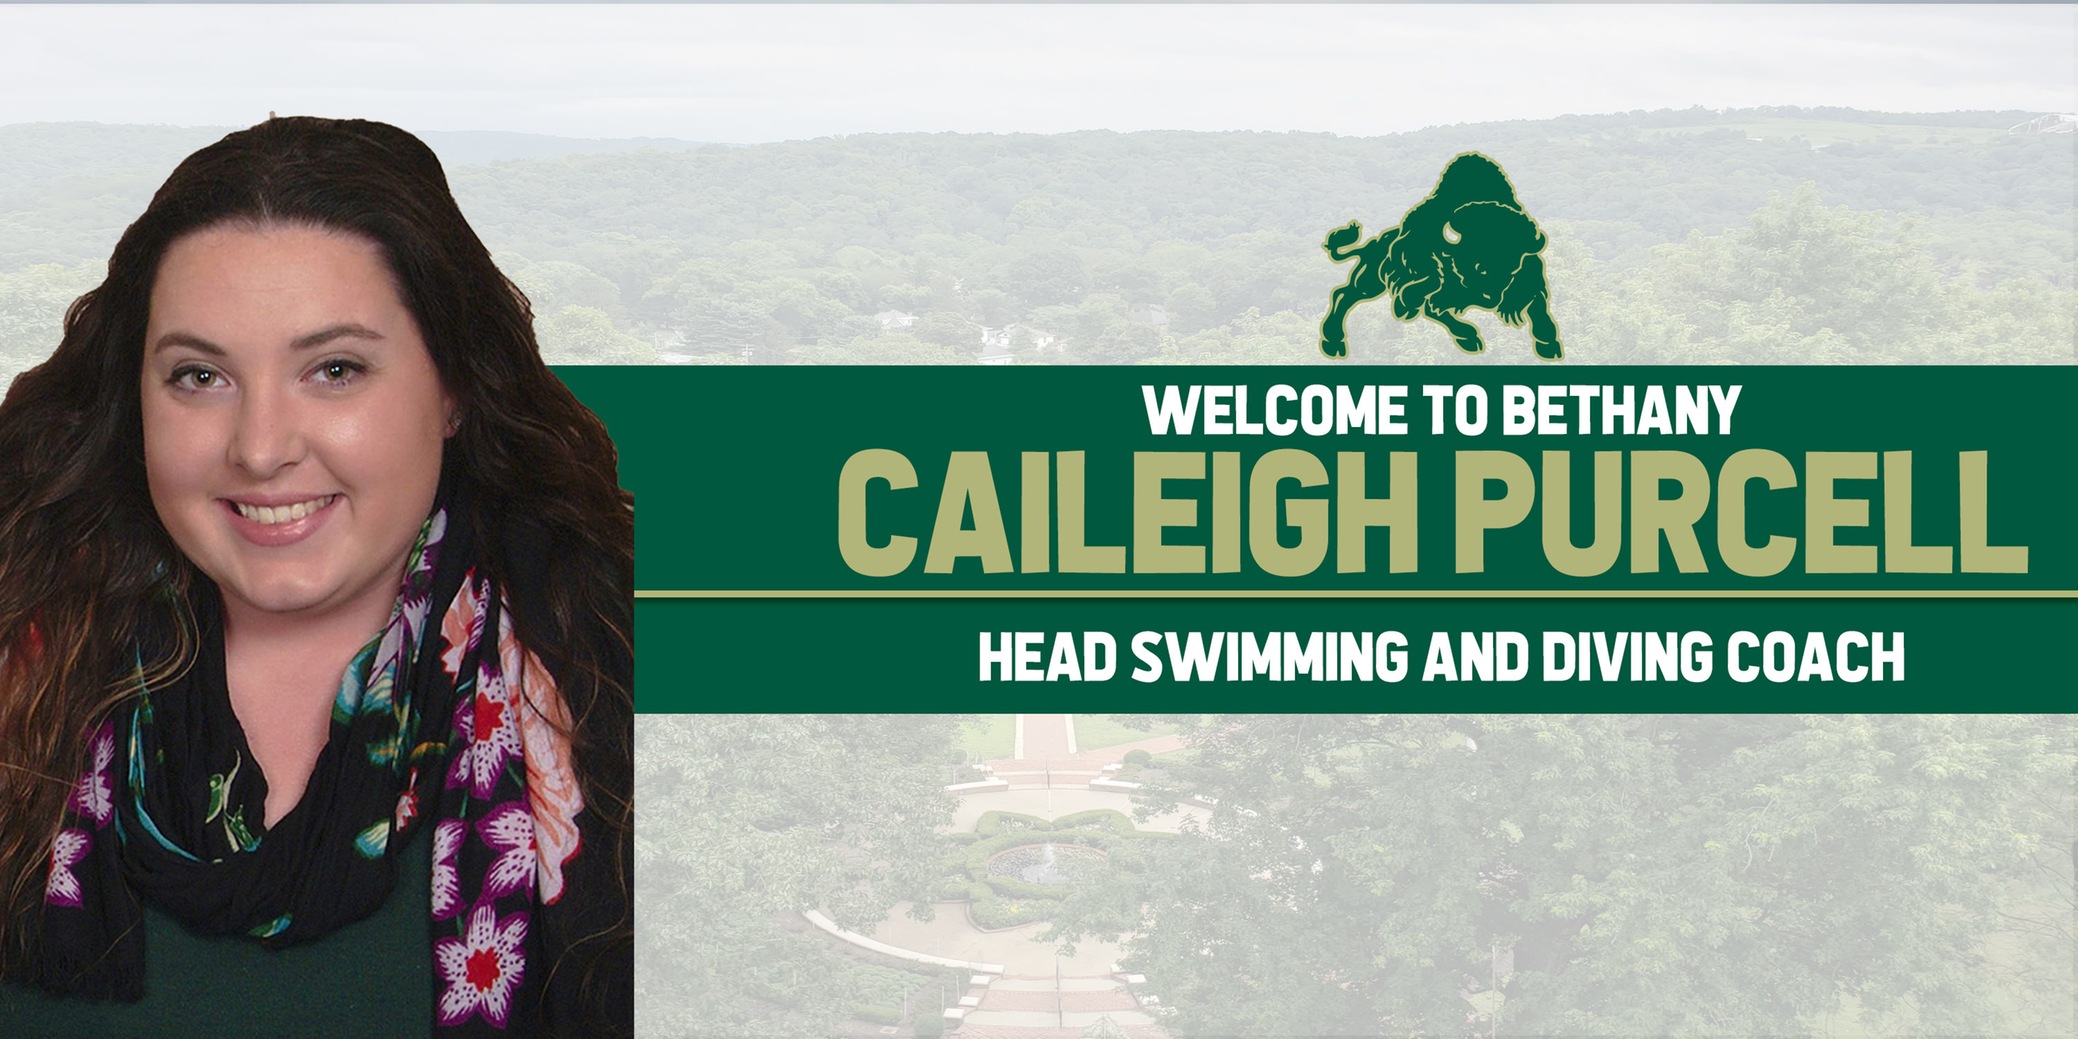 Bethany Hires Purcell as New Swimming and Diving Coach